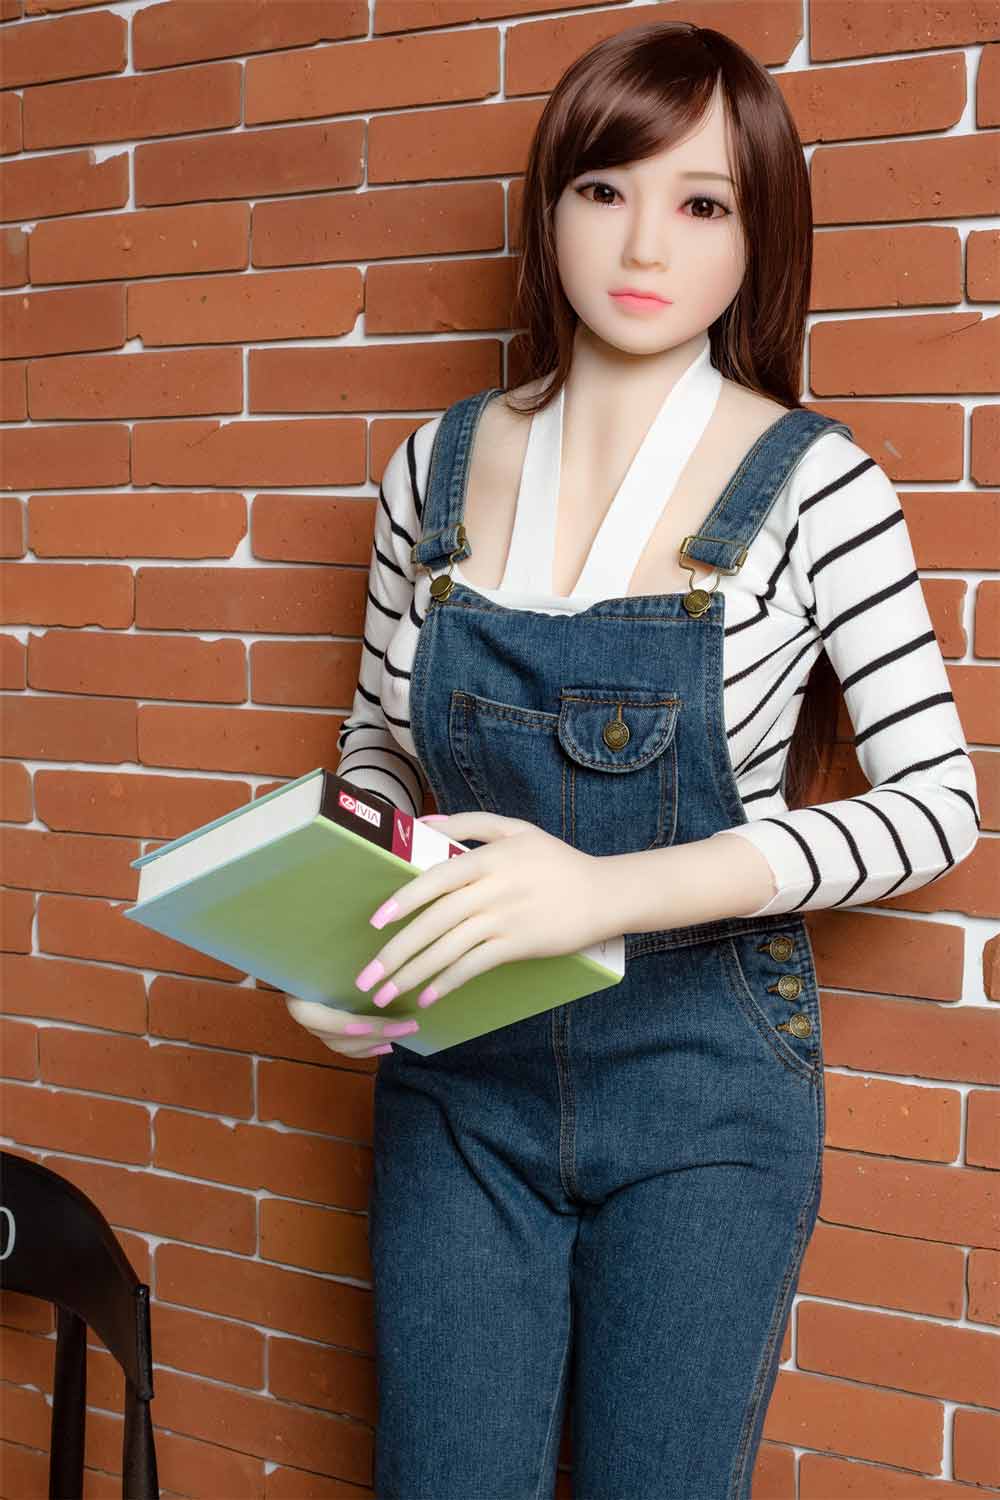 Sex doll with book in both hands